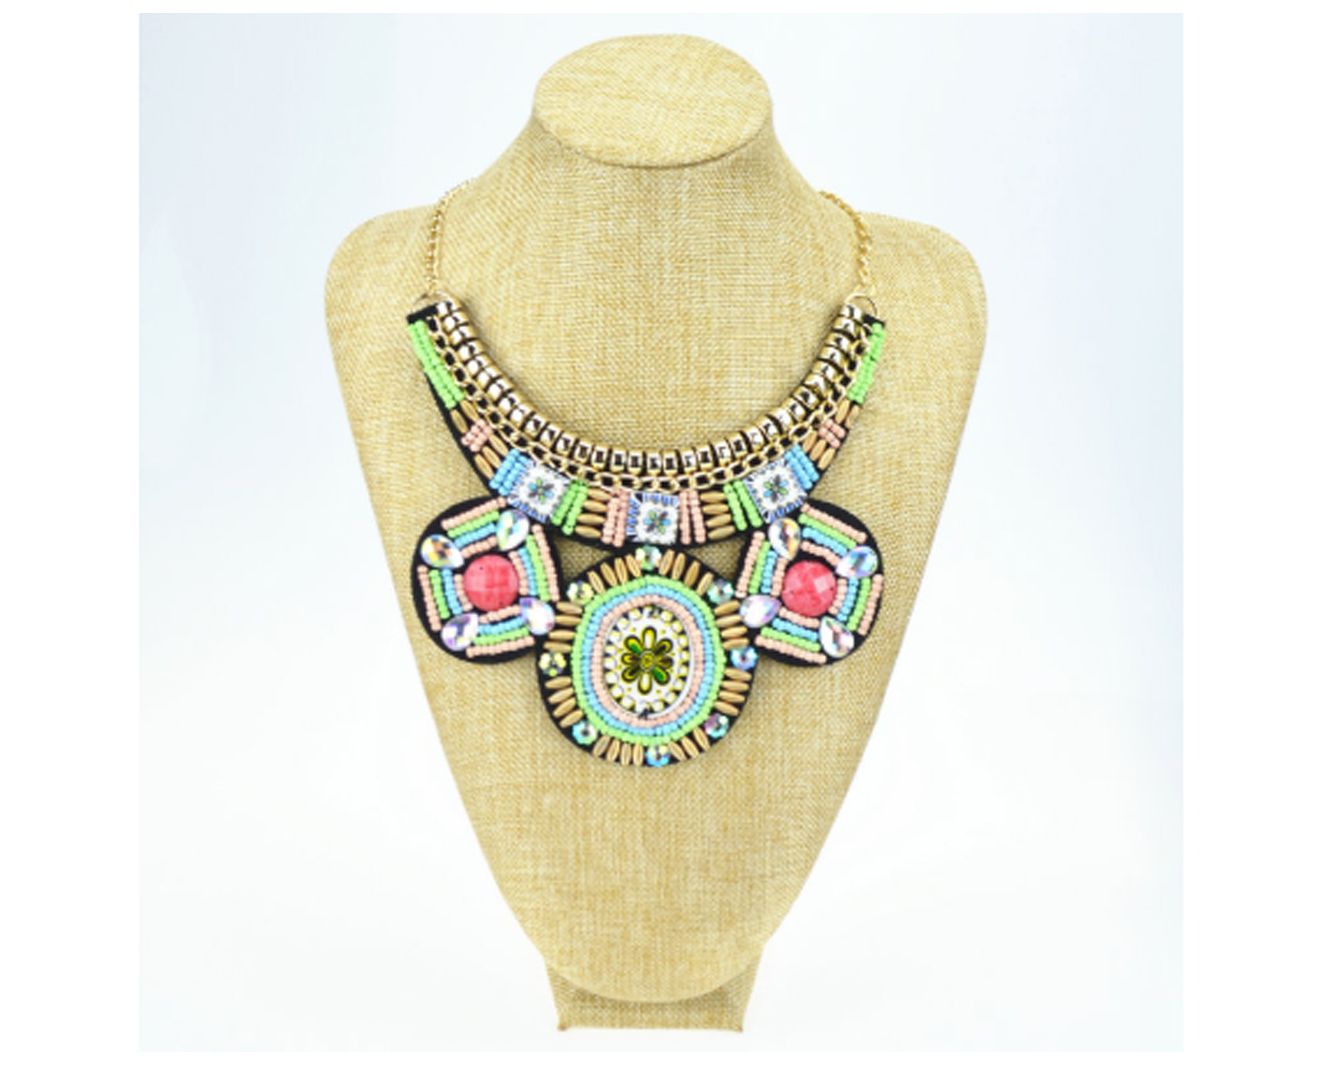 Handmade Embroidery Multicolor Necklace